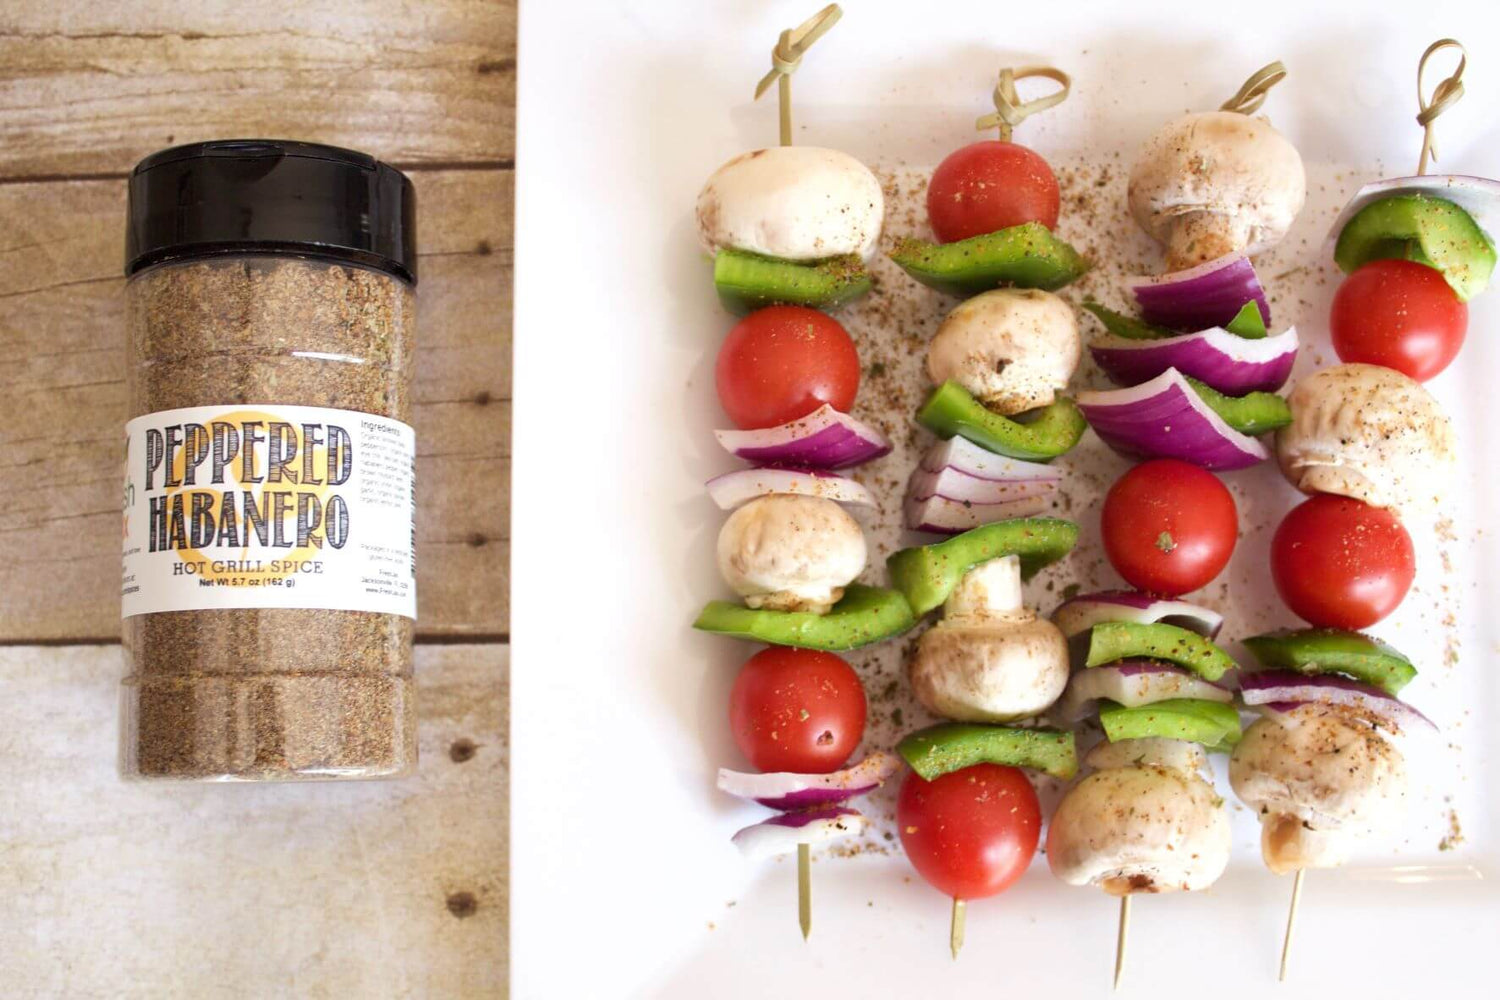 A bottle of FreshJax Organic Peppered Habanero Seasoning next to a plate of cooked veggie kabobs.